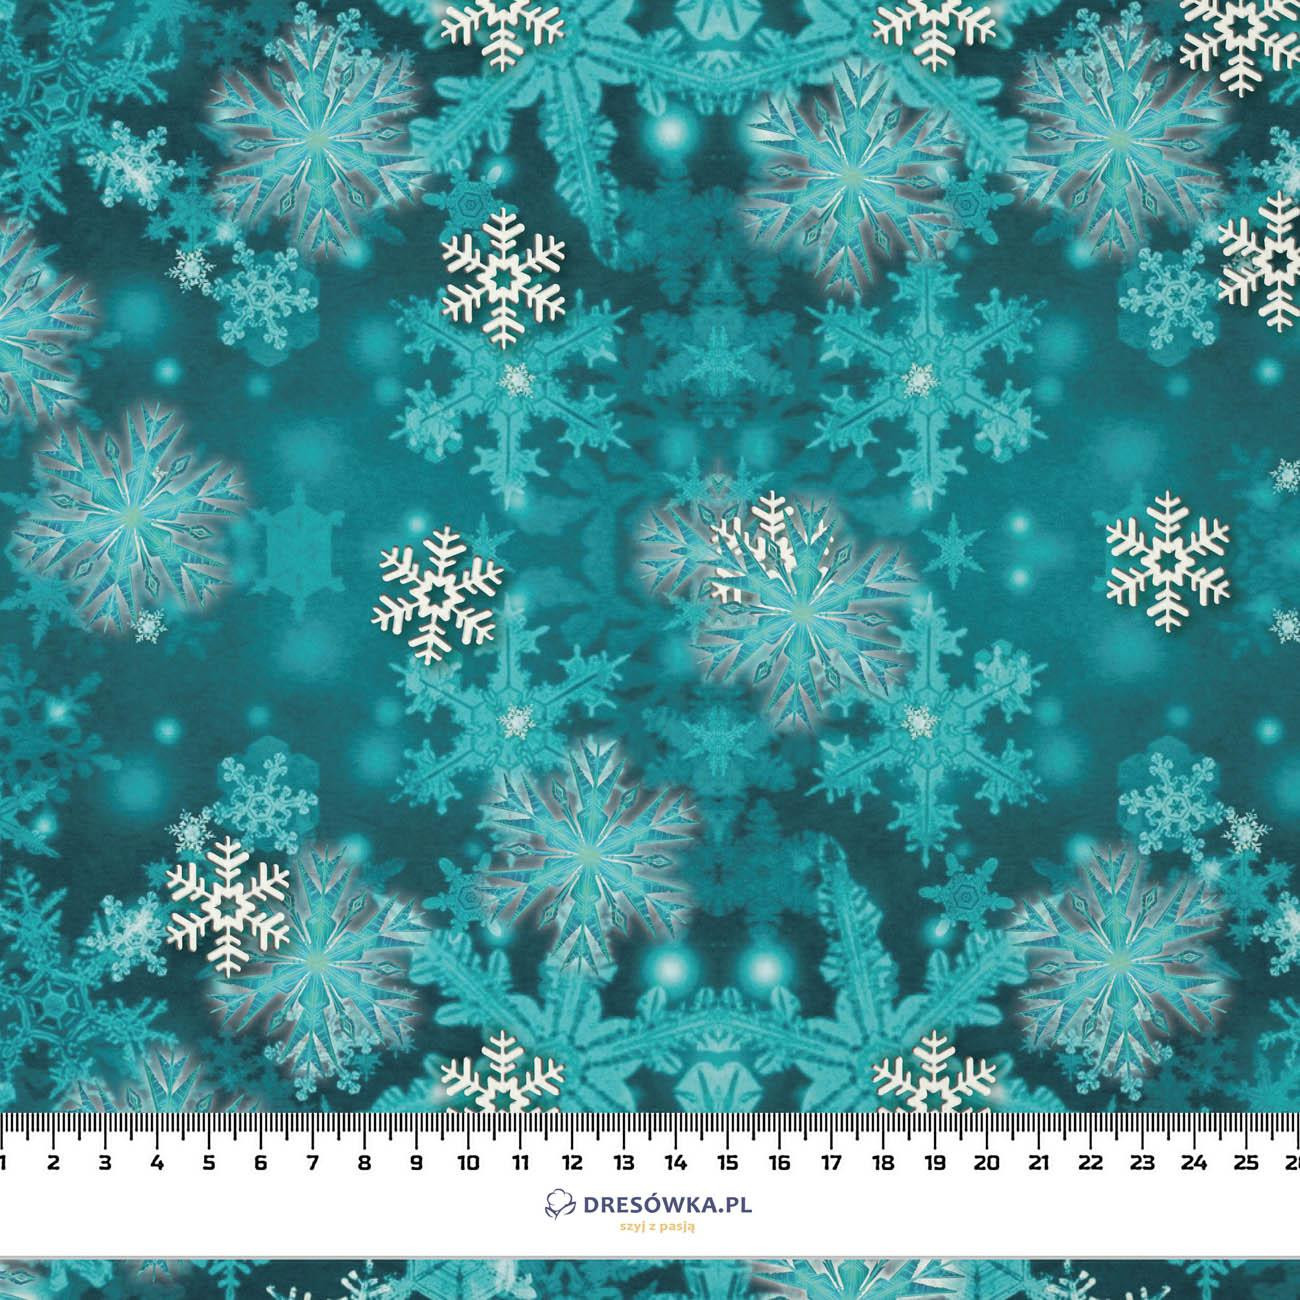 TURQUOISE SNOWFLAKES (PENGUINS) - Waterproof woven fabric